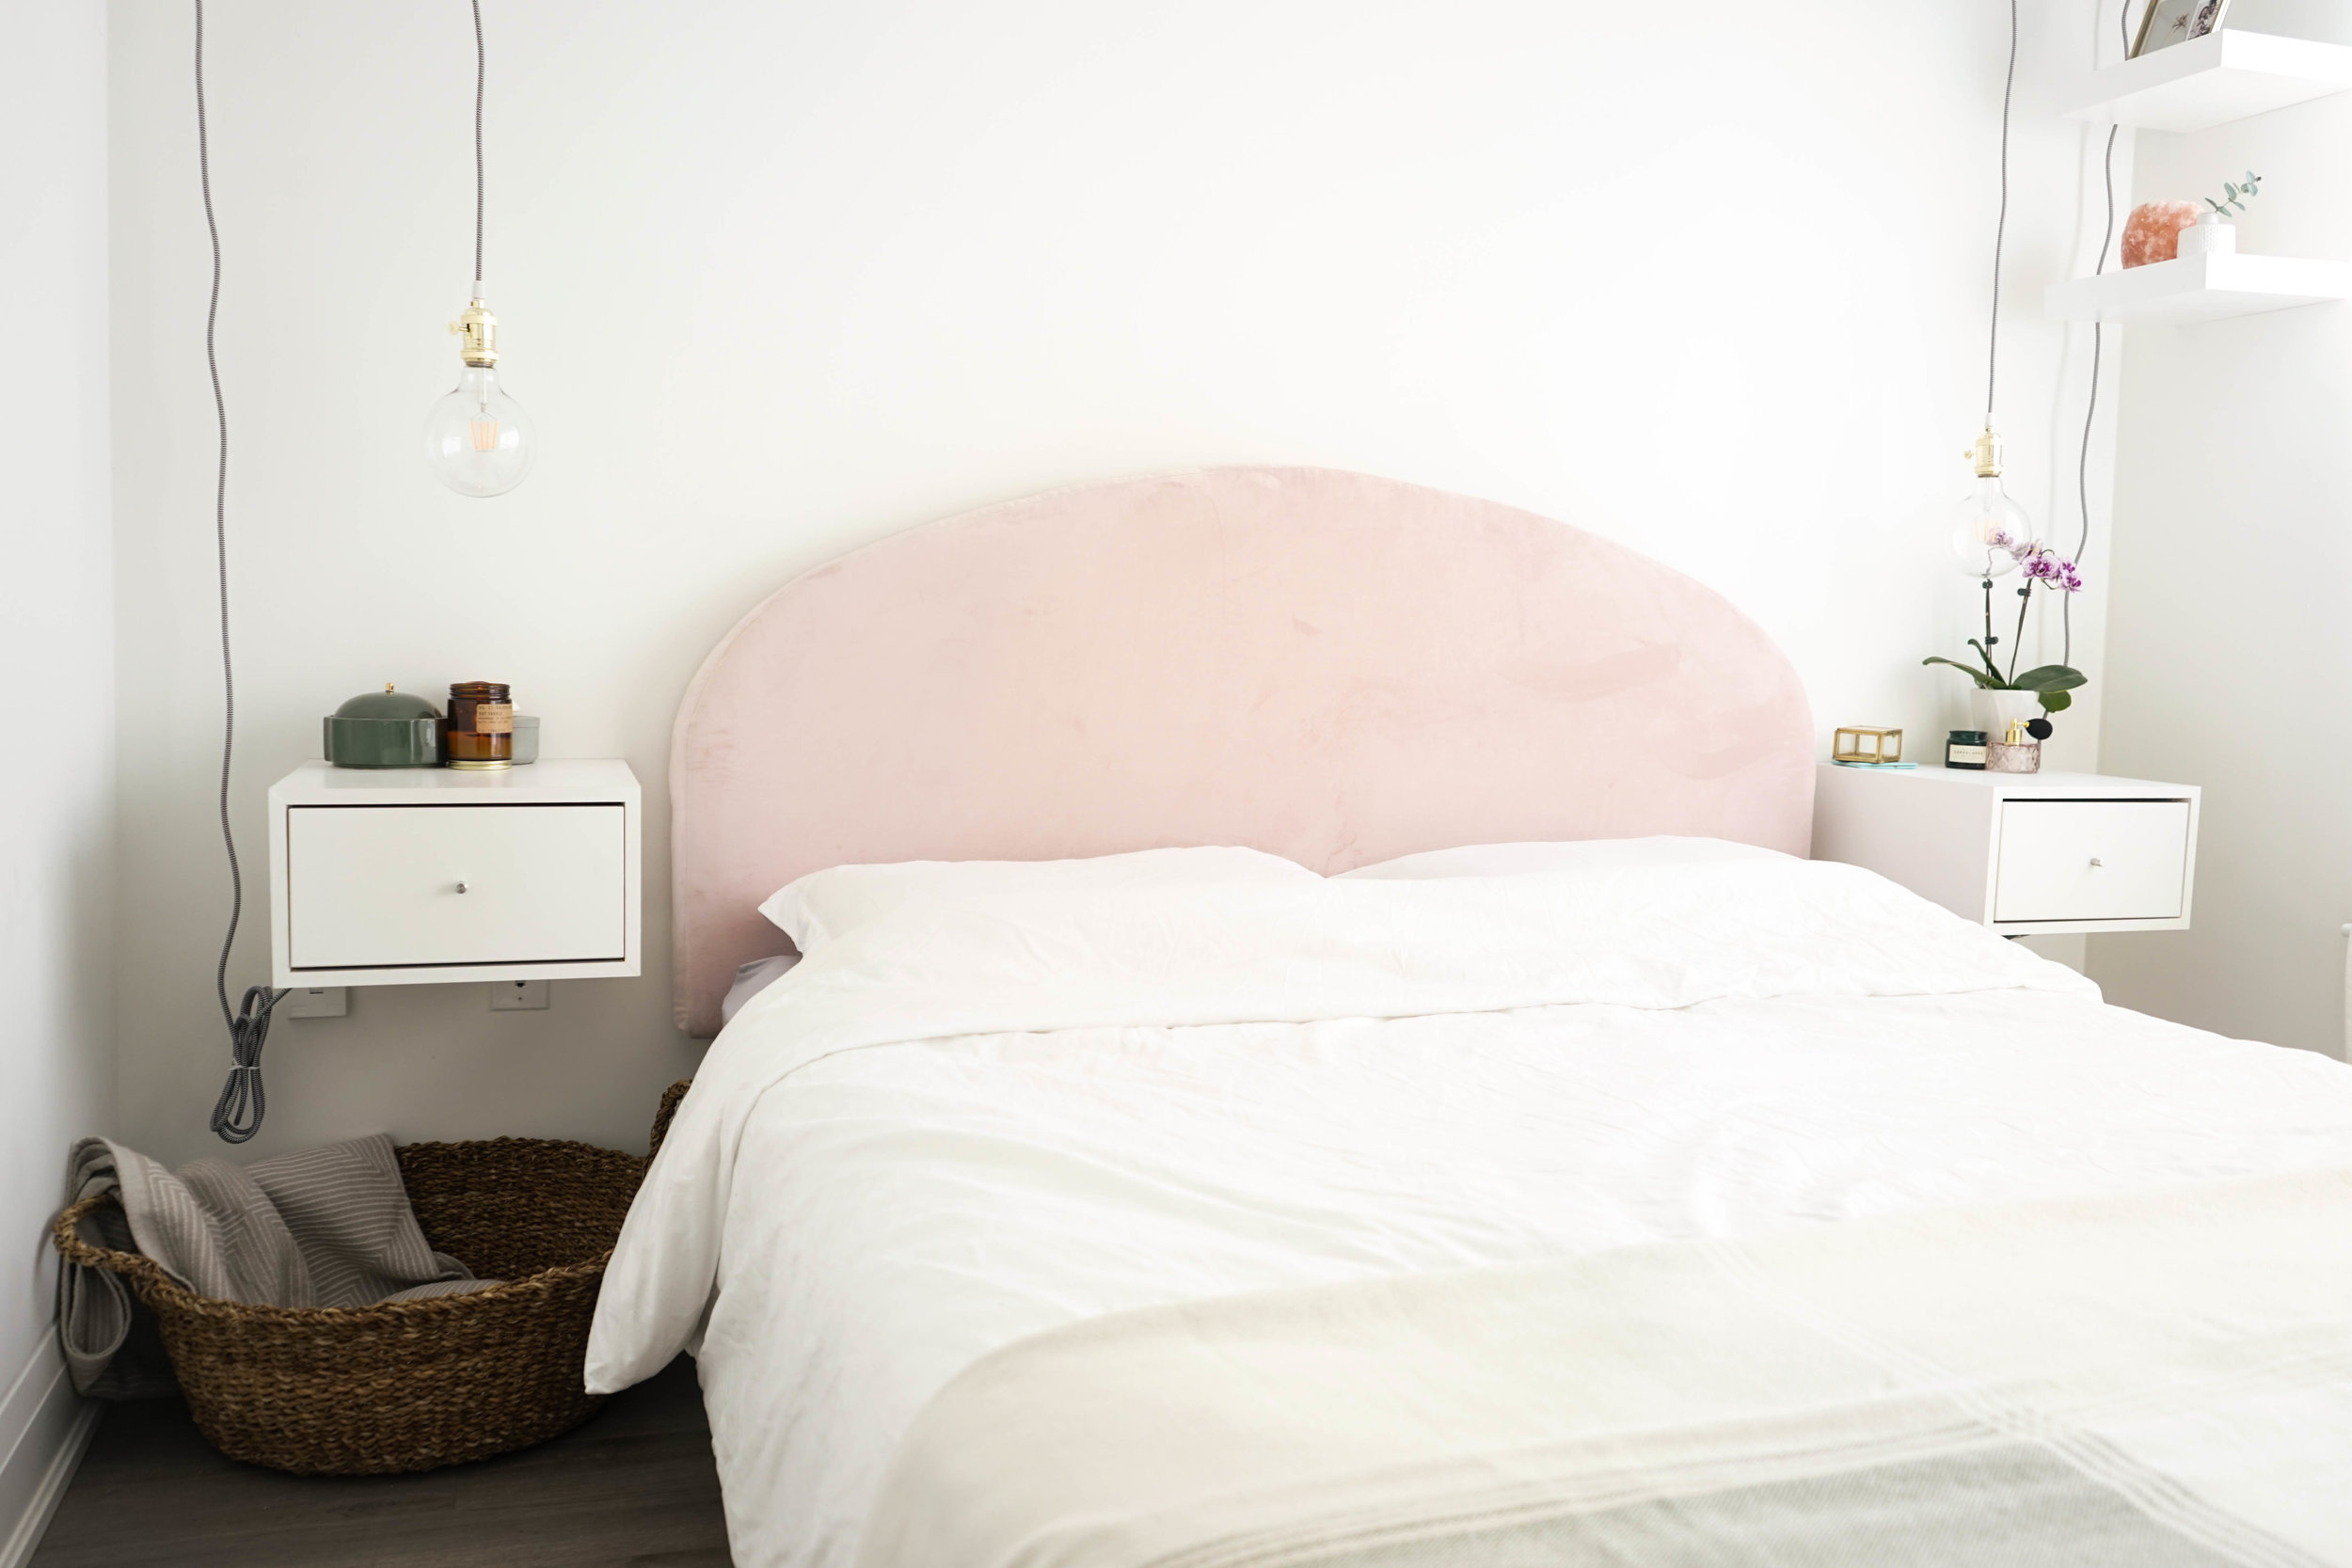 Diy Rounded Pink Headboard The Sorry, How To Make A Headboard To Hang On The Wall